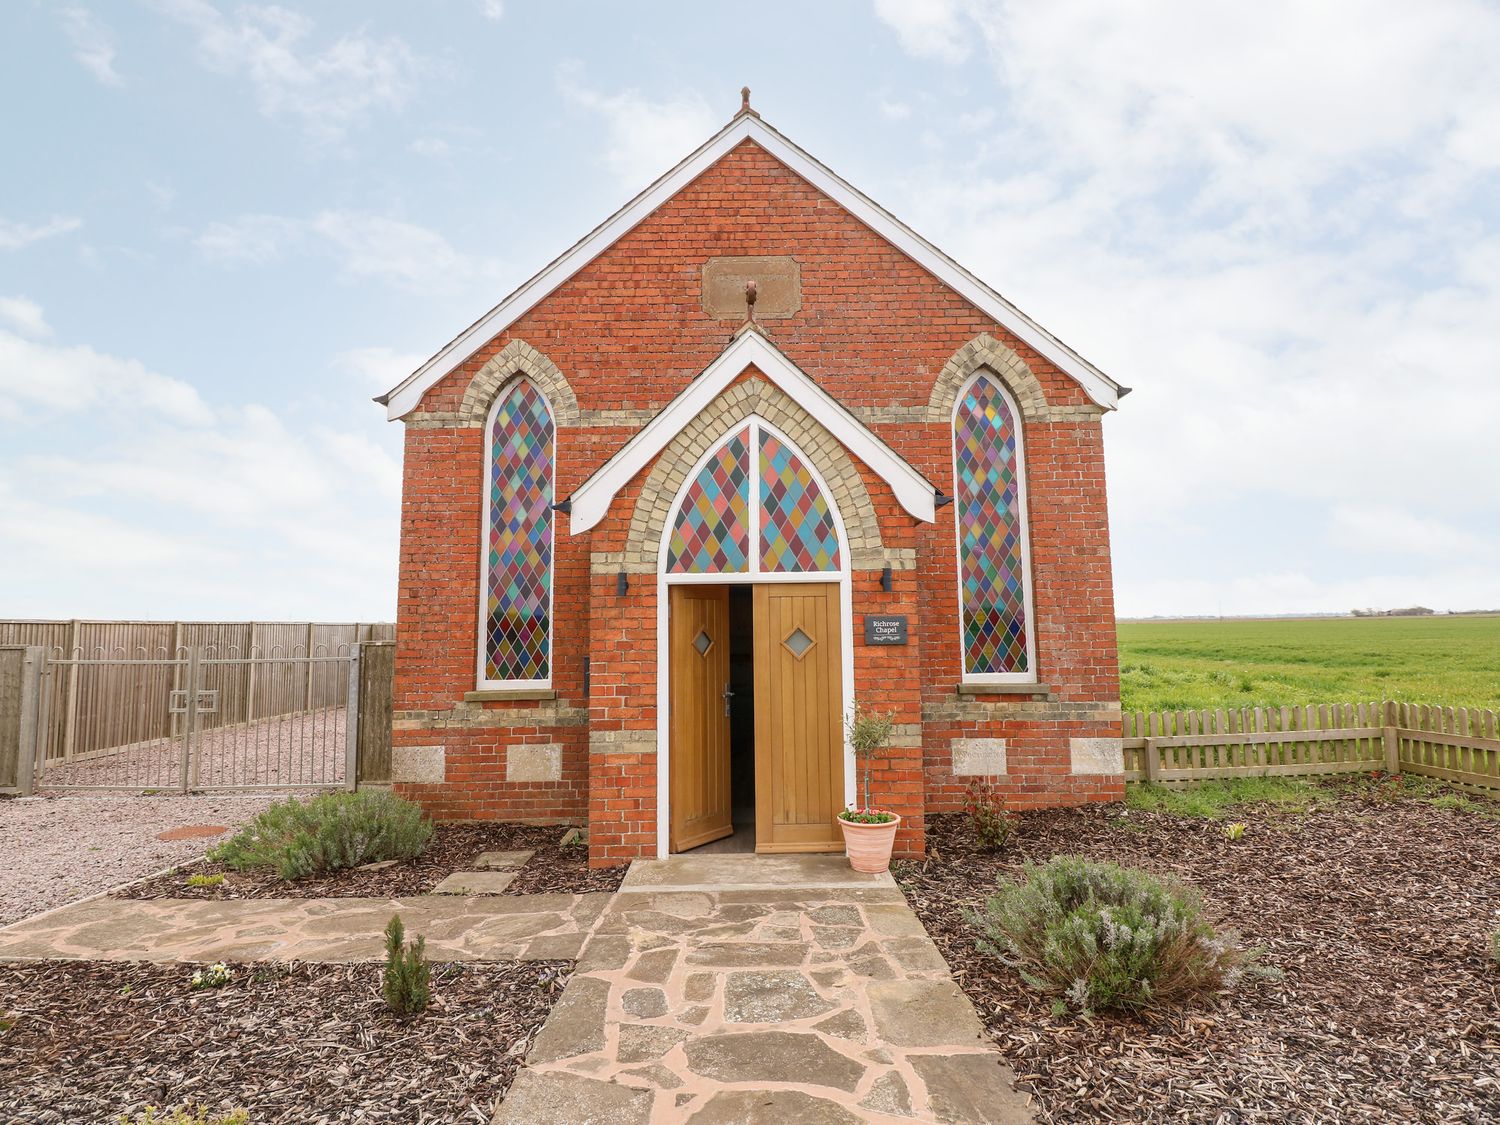 Richrose Chapel near Holbeach in Lincolnshire. Close to AONB. Garden with patio and hot tub. Parking